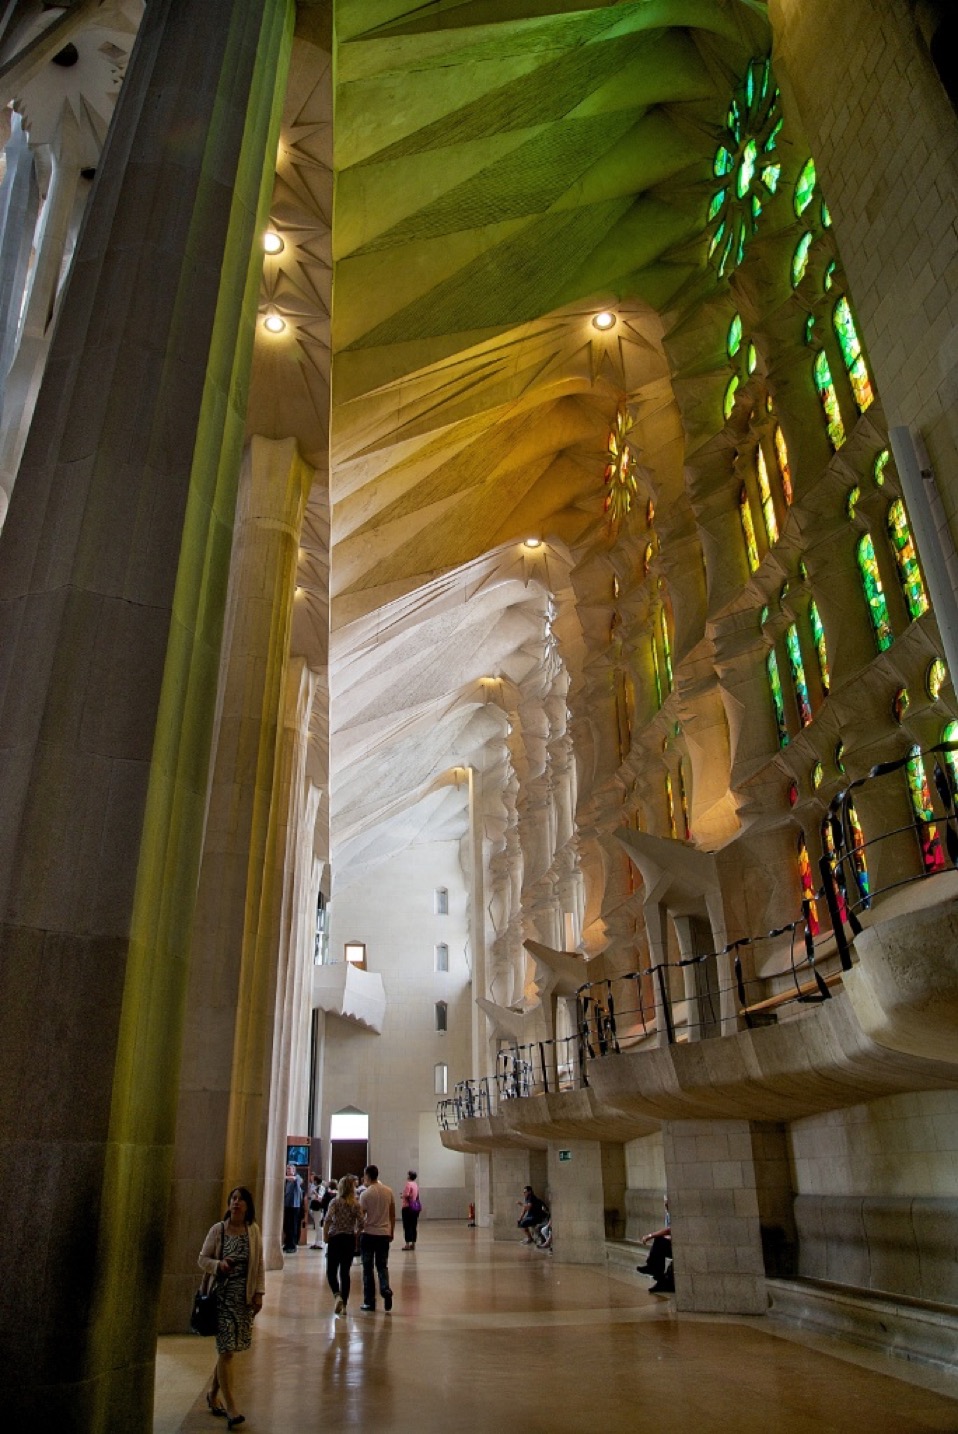 Lateral Aisle and Stained Glass Windows